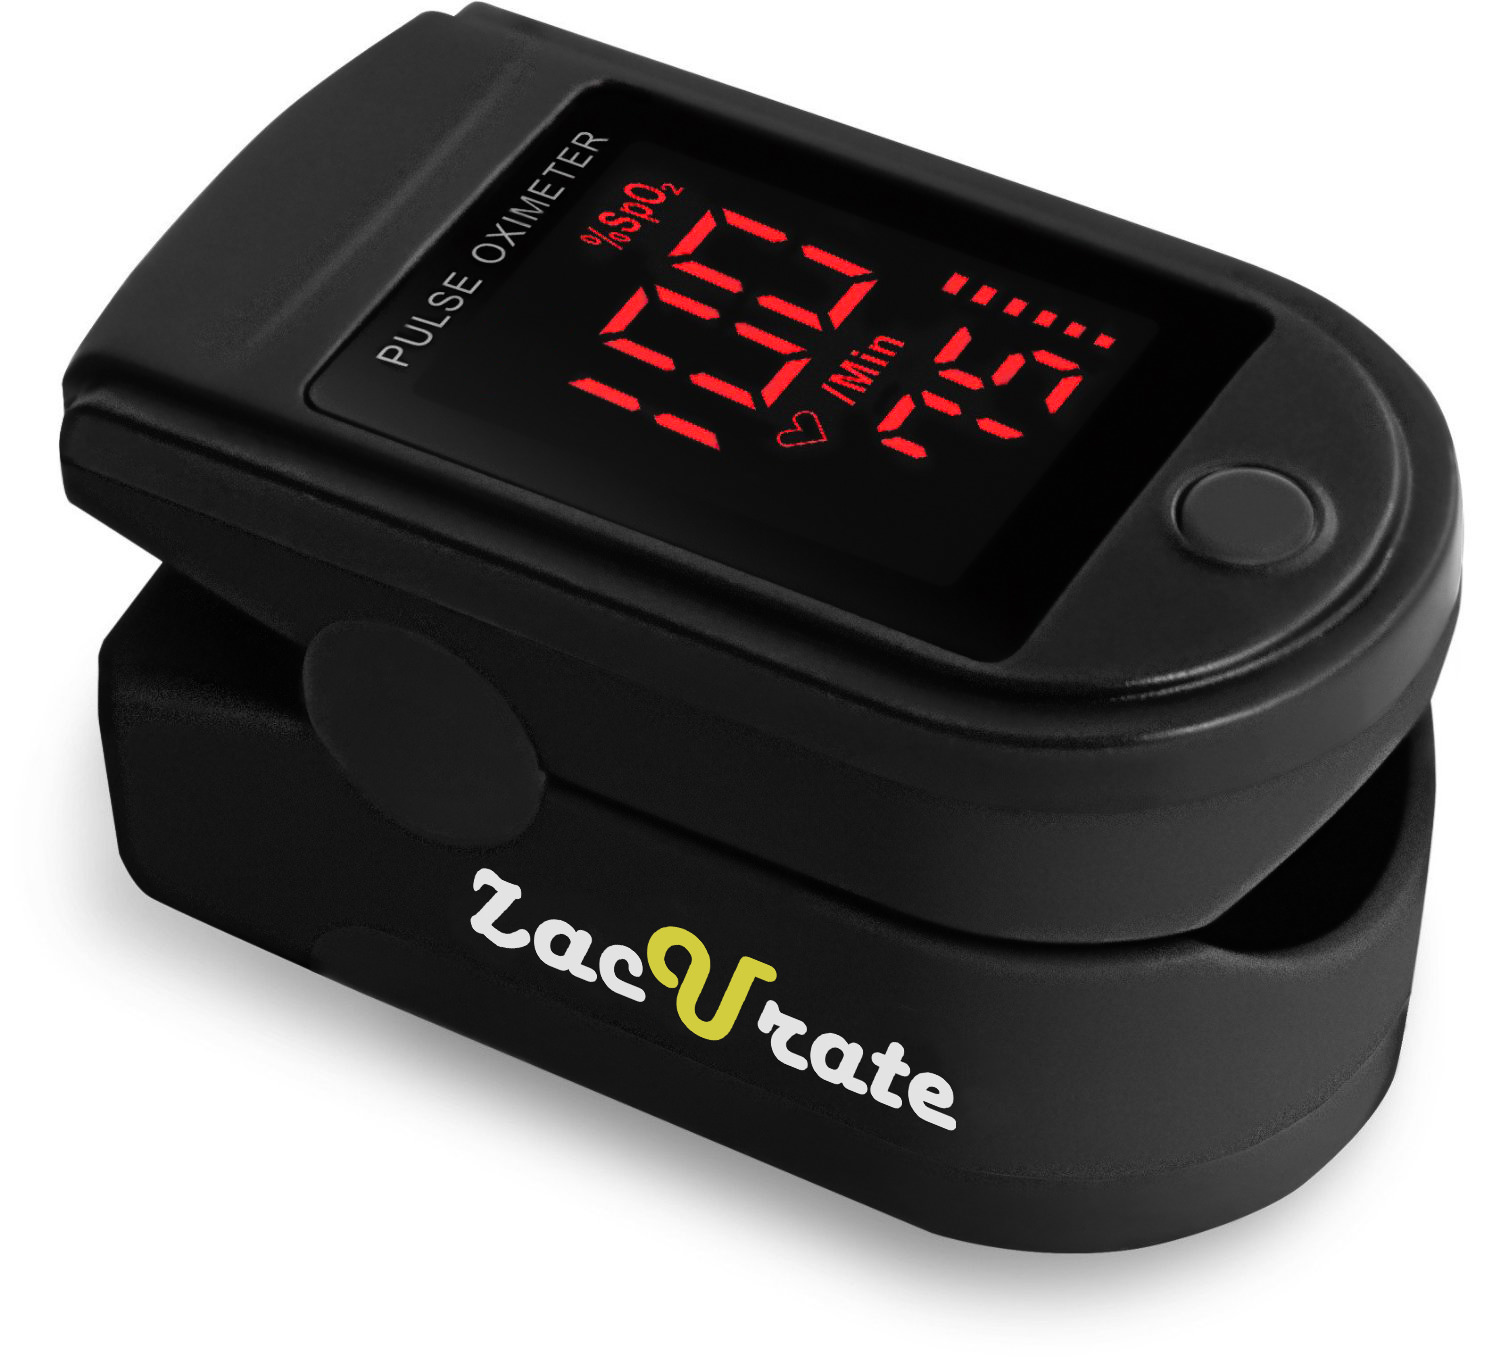 Zacurate Pro Series 500DL Sporting and Aviation Fingertip Pulse Oximeter Blood Oxygen Saturation Monitor (Royal Black) - image 1 of 7